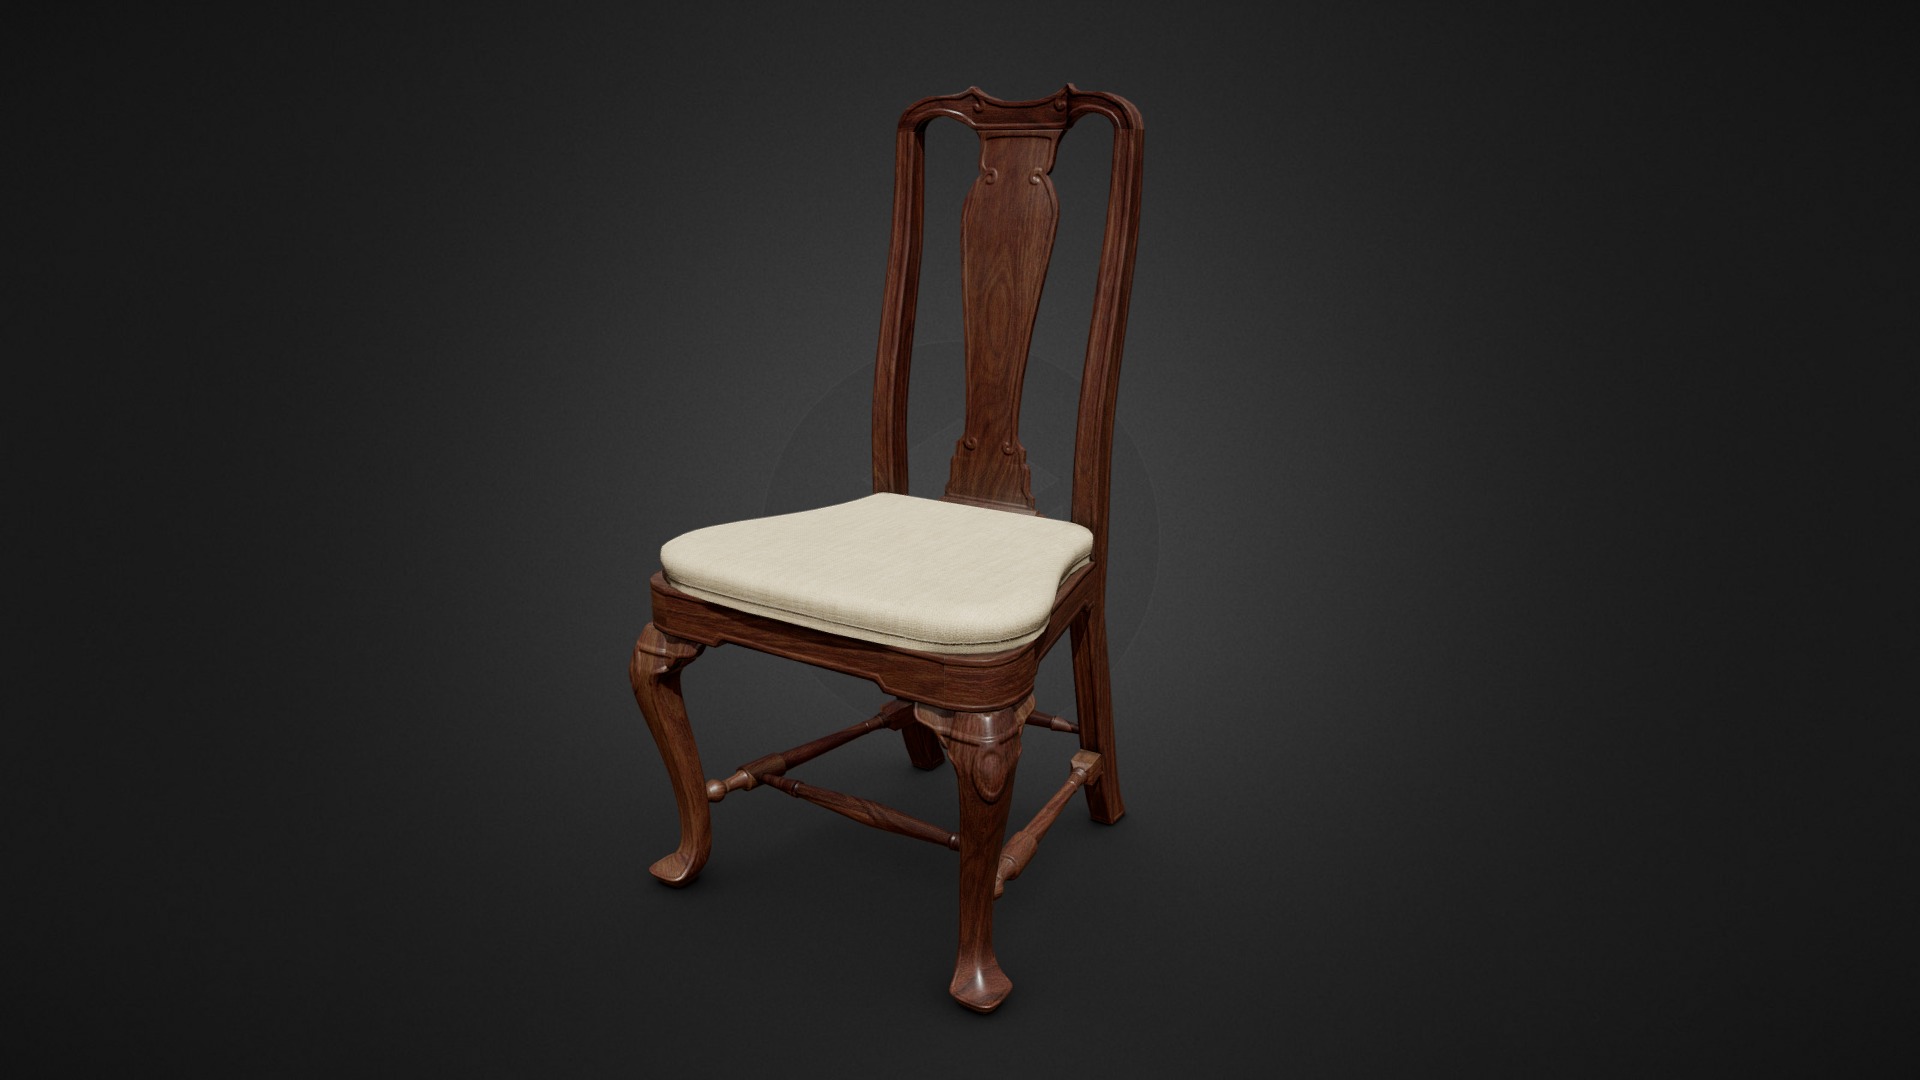 3D model Queen Anne Side Chair - This is a 3D model of the Queen Anne Side Chair. The 3D model is about a wooden chair with a cushion.